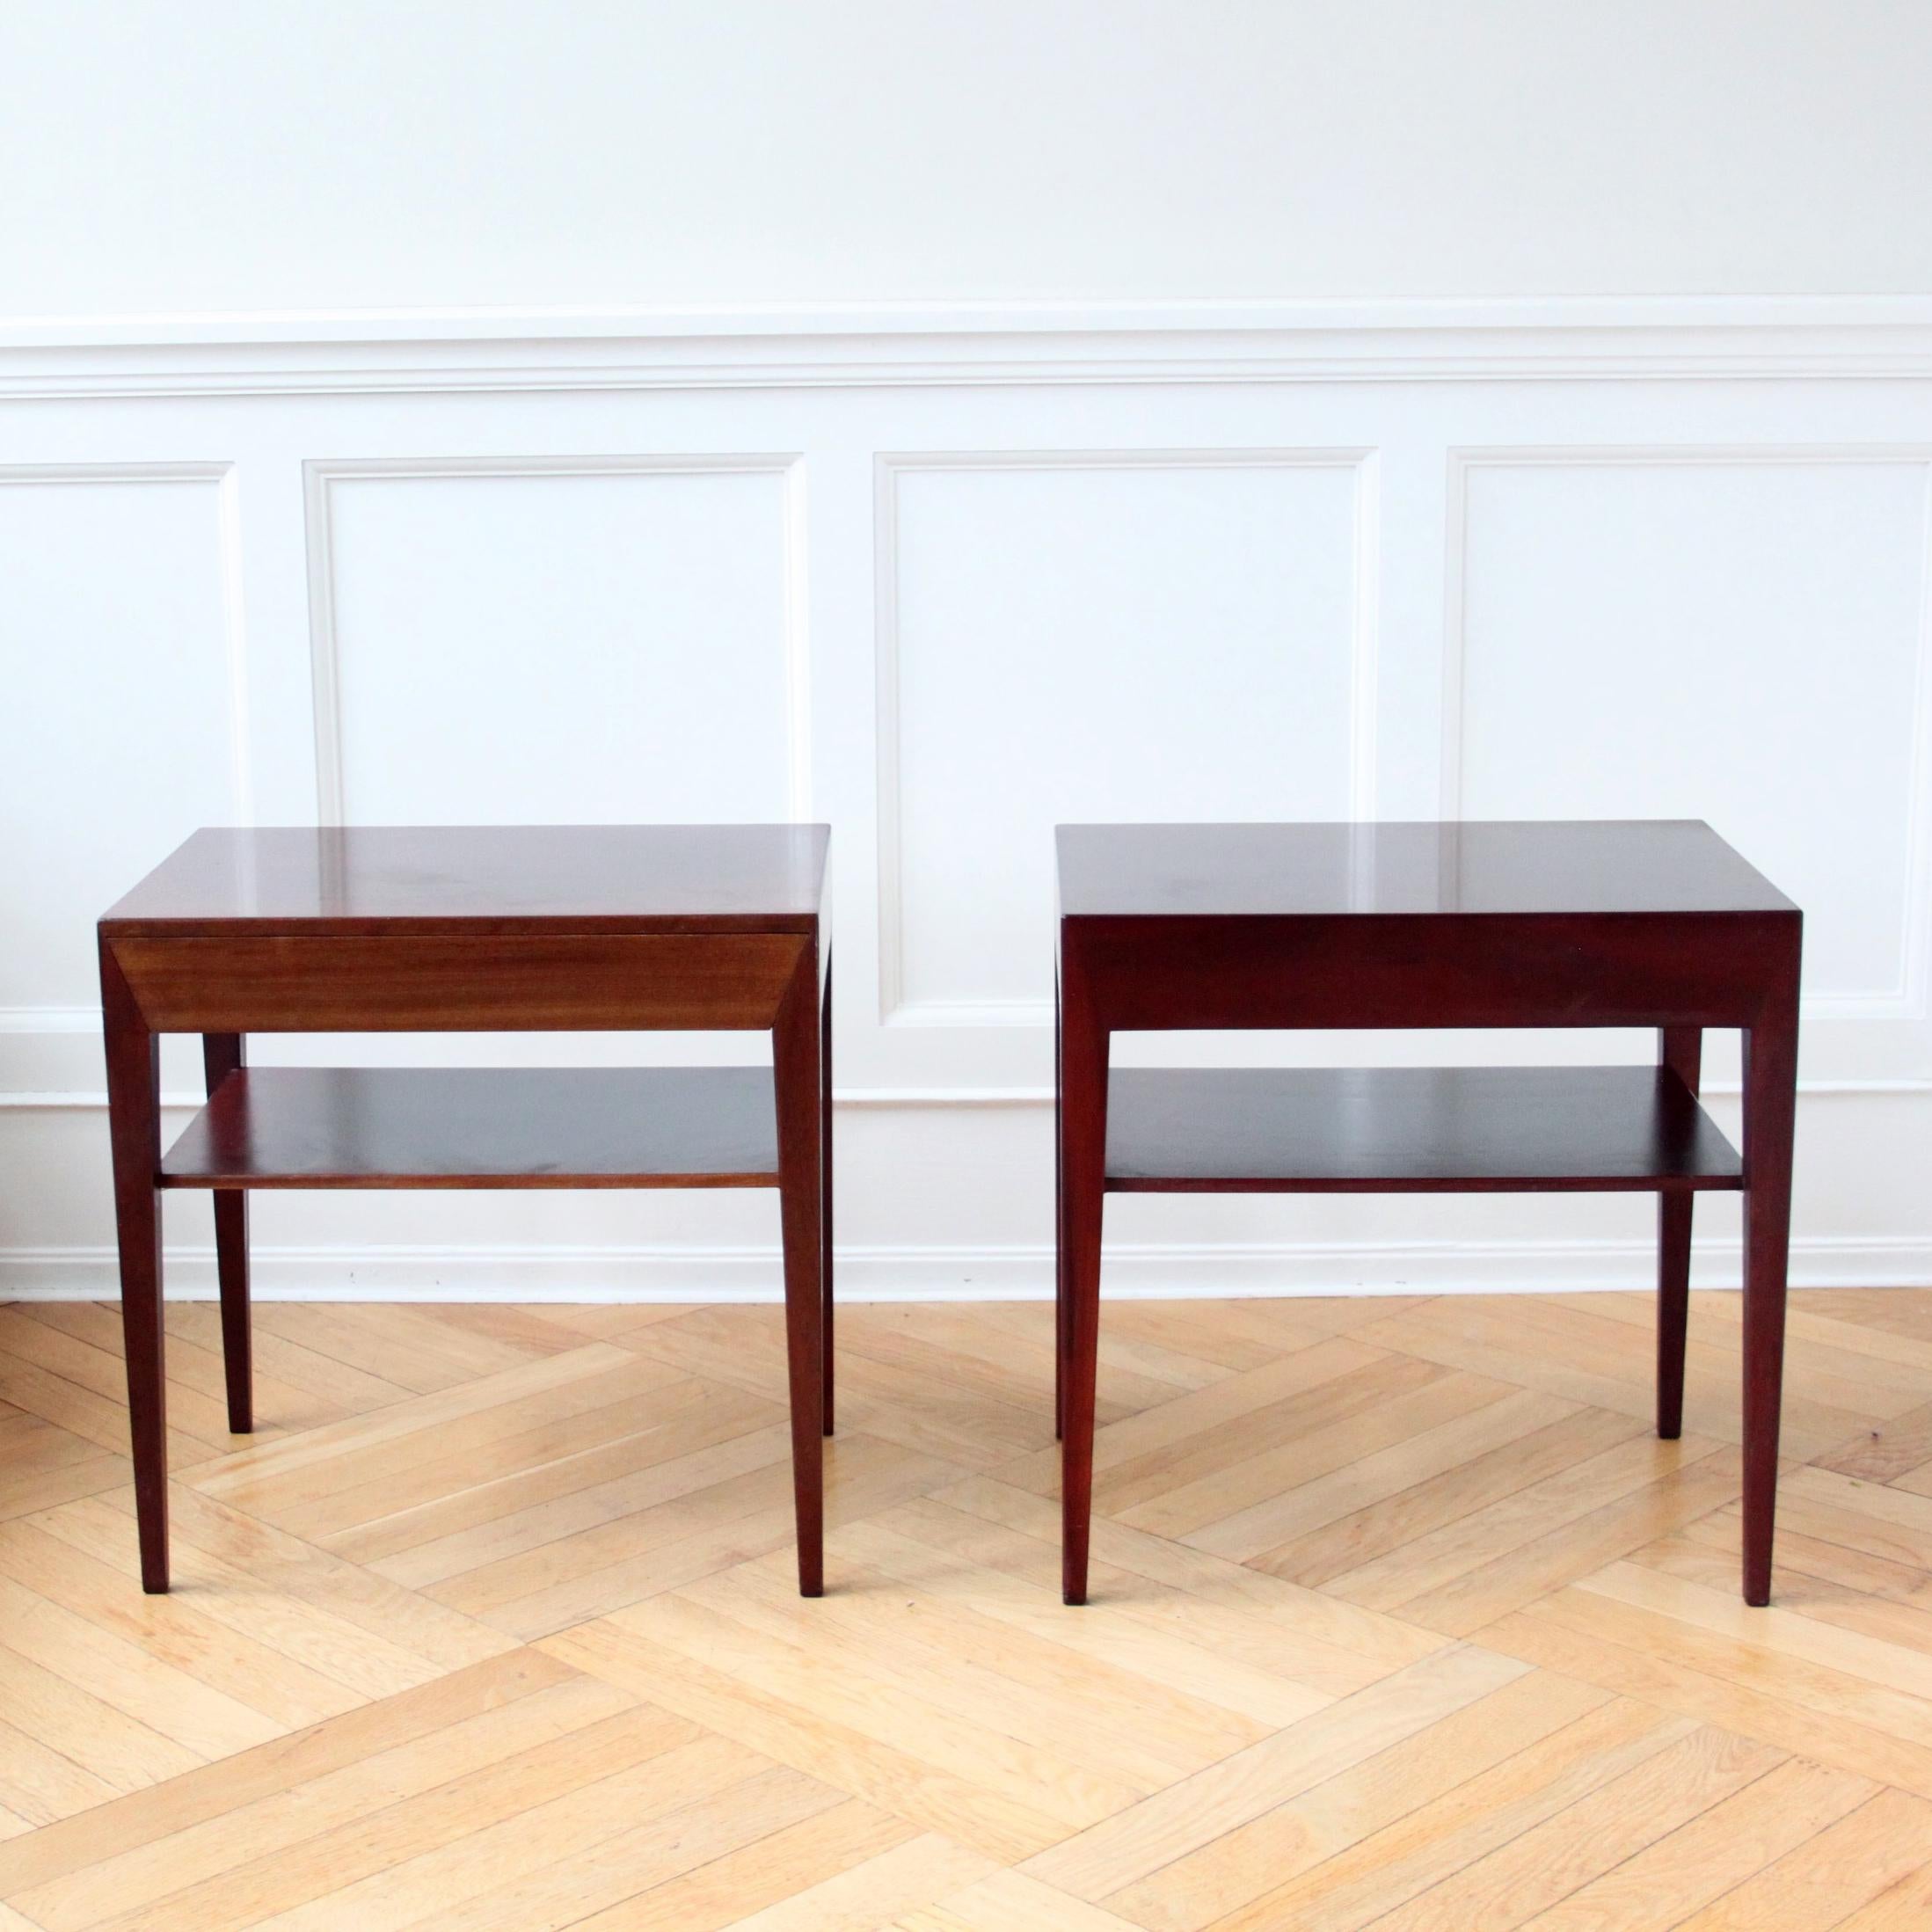 SEVERIN HANSEN & HASLEV MØBELSNEDKERI   -   
SCANDINAVIAN MODERN DESIGN

A beautiful pair of bedside tables in mahogany by designer Severin Hansen and cabinetmaker Haslev Møbelsnedkeri, Denmark circa 1950s.
The pair of tables have his trademark with